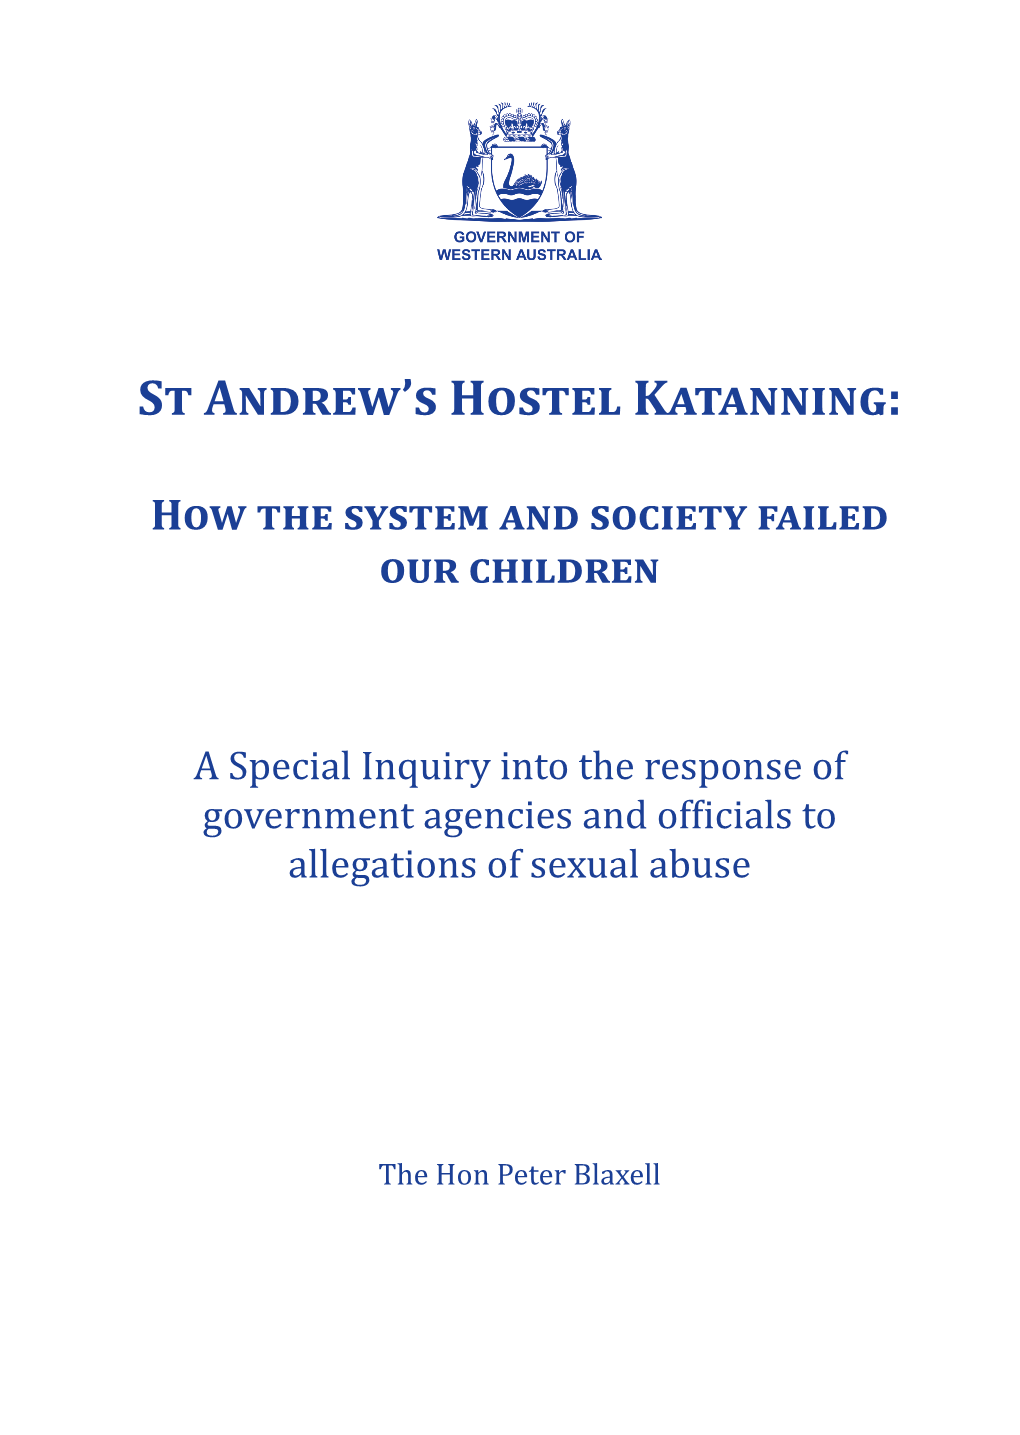 St Andrew's Hostel Katanning: How the System and Society Failed Our Children Message from the Inquirer